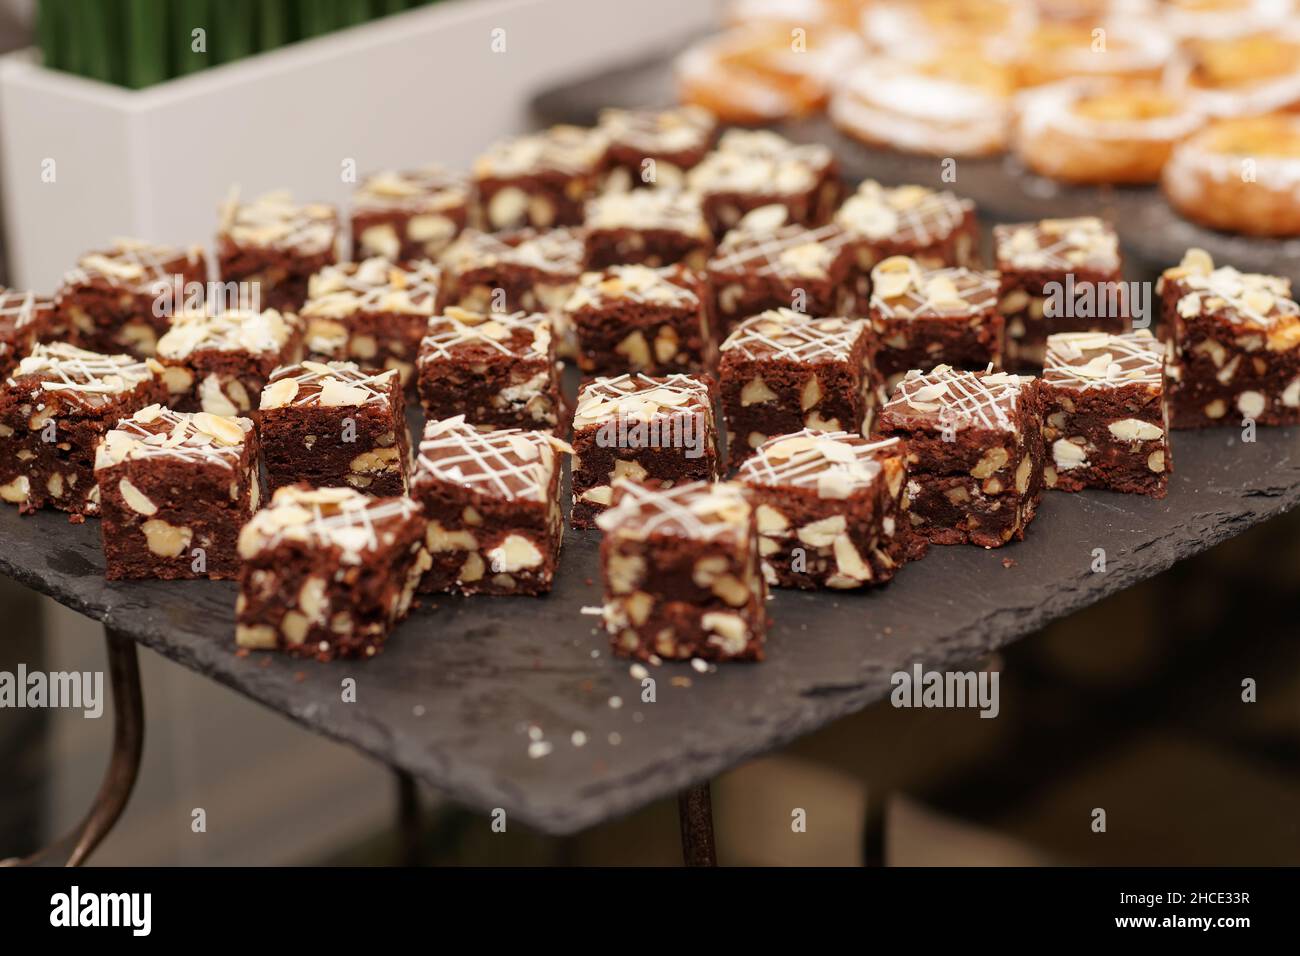 Chocolate brownies with almond on banquet table Stock Photo